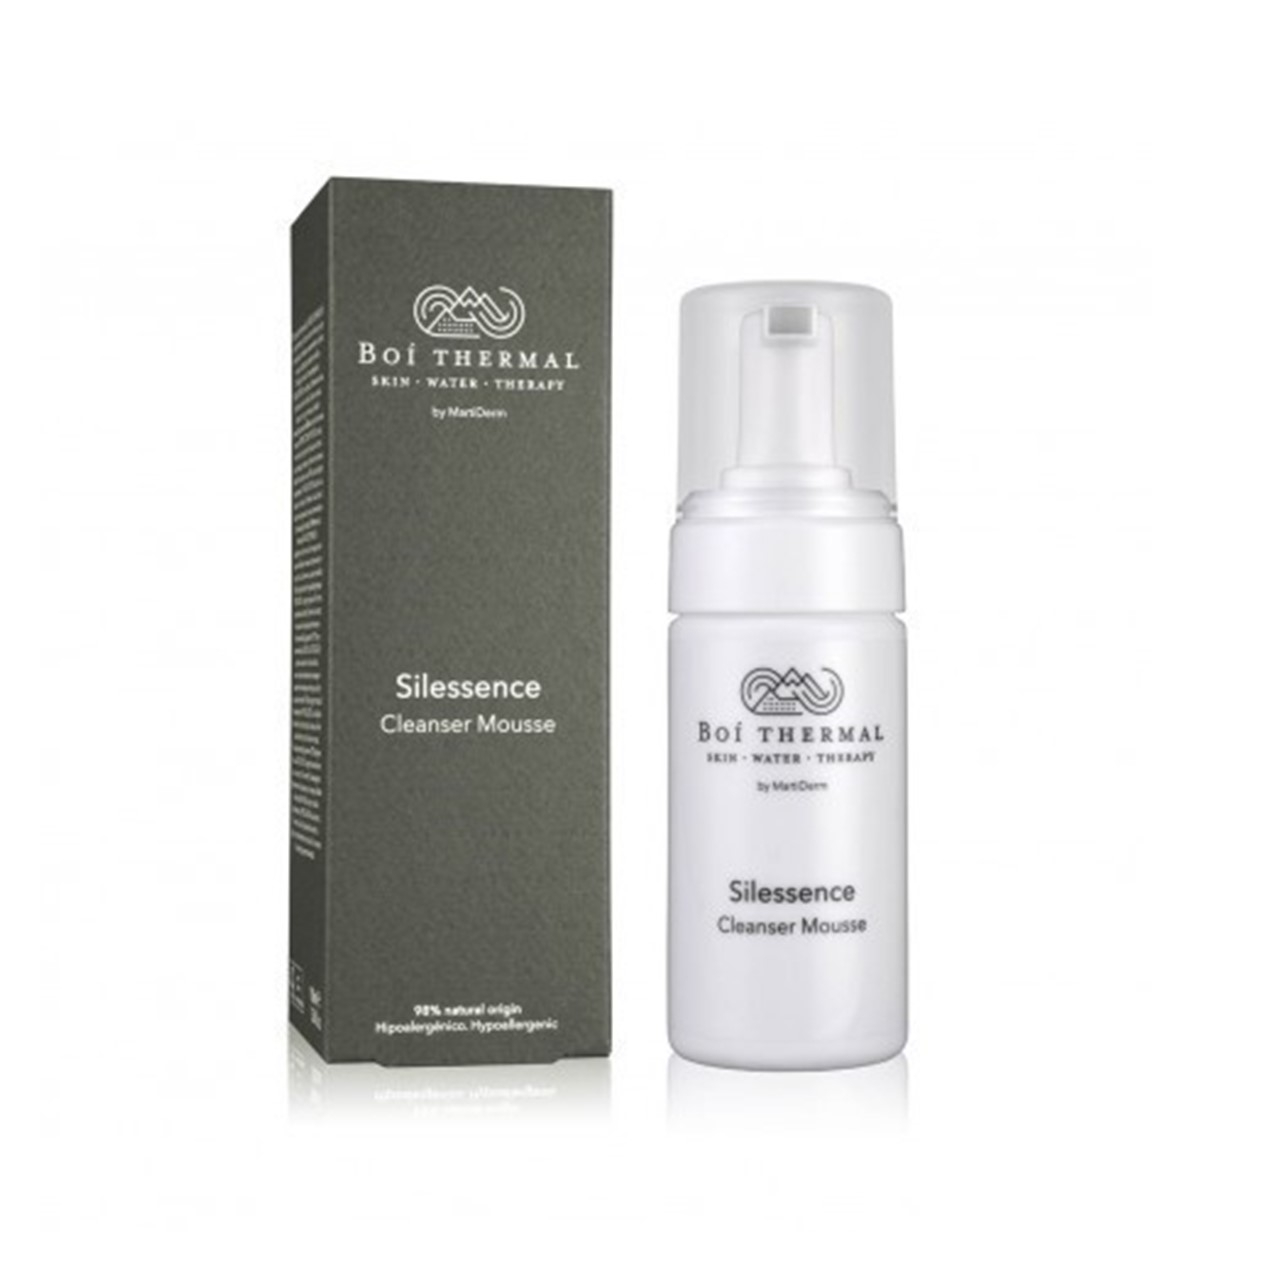 Boí Thermal Silessence Cleanser Mousse 100ml (3.38fl oz)